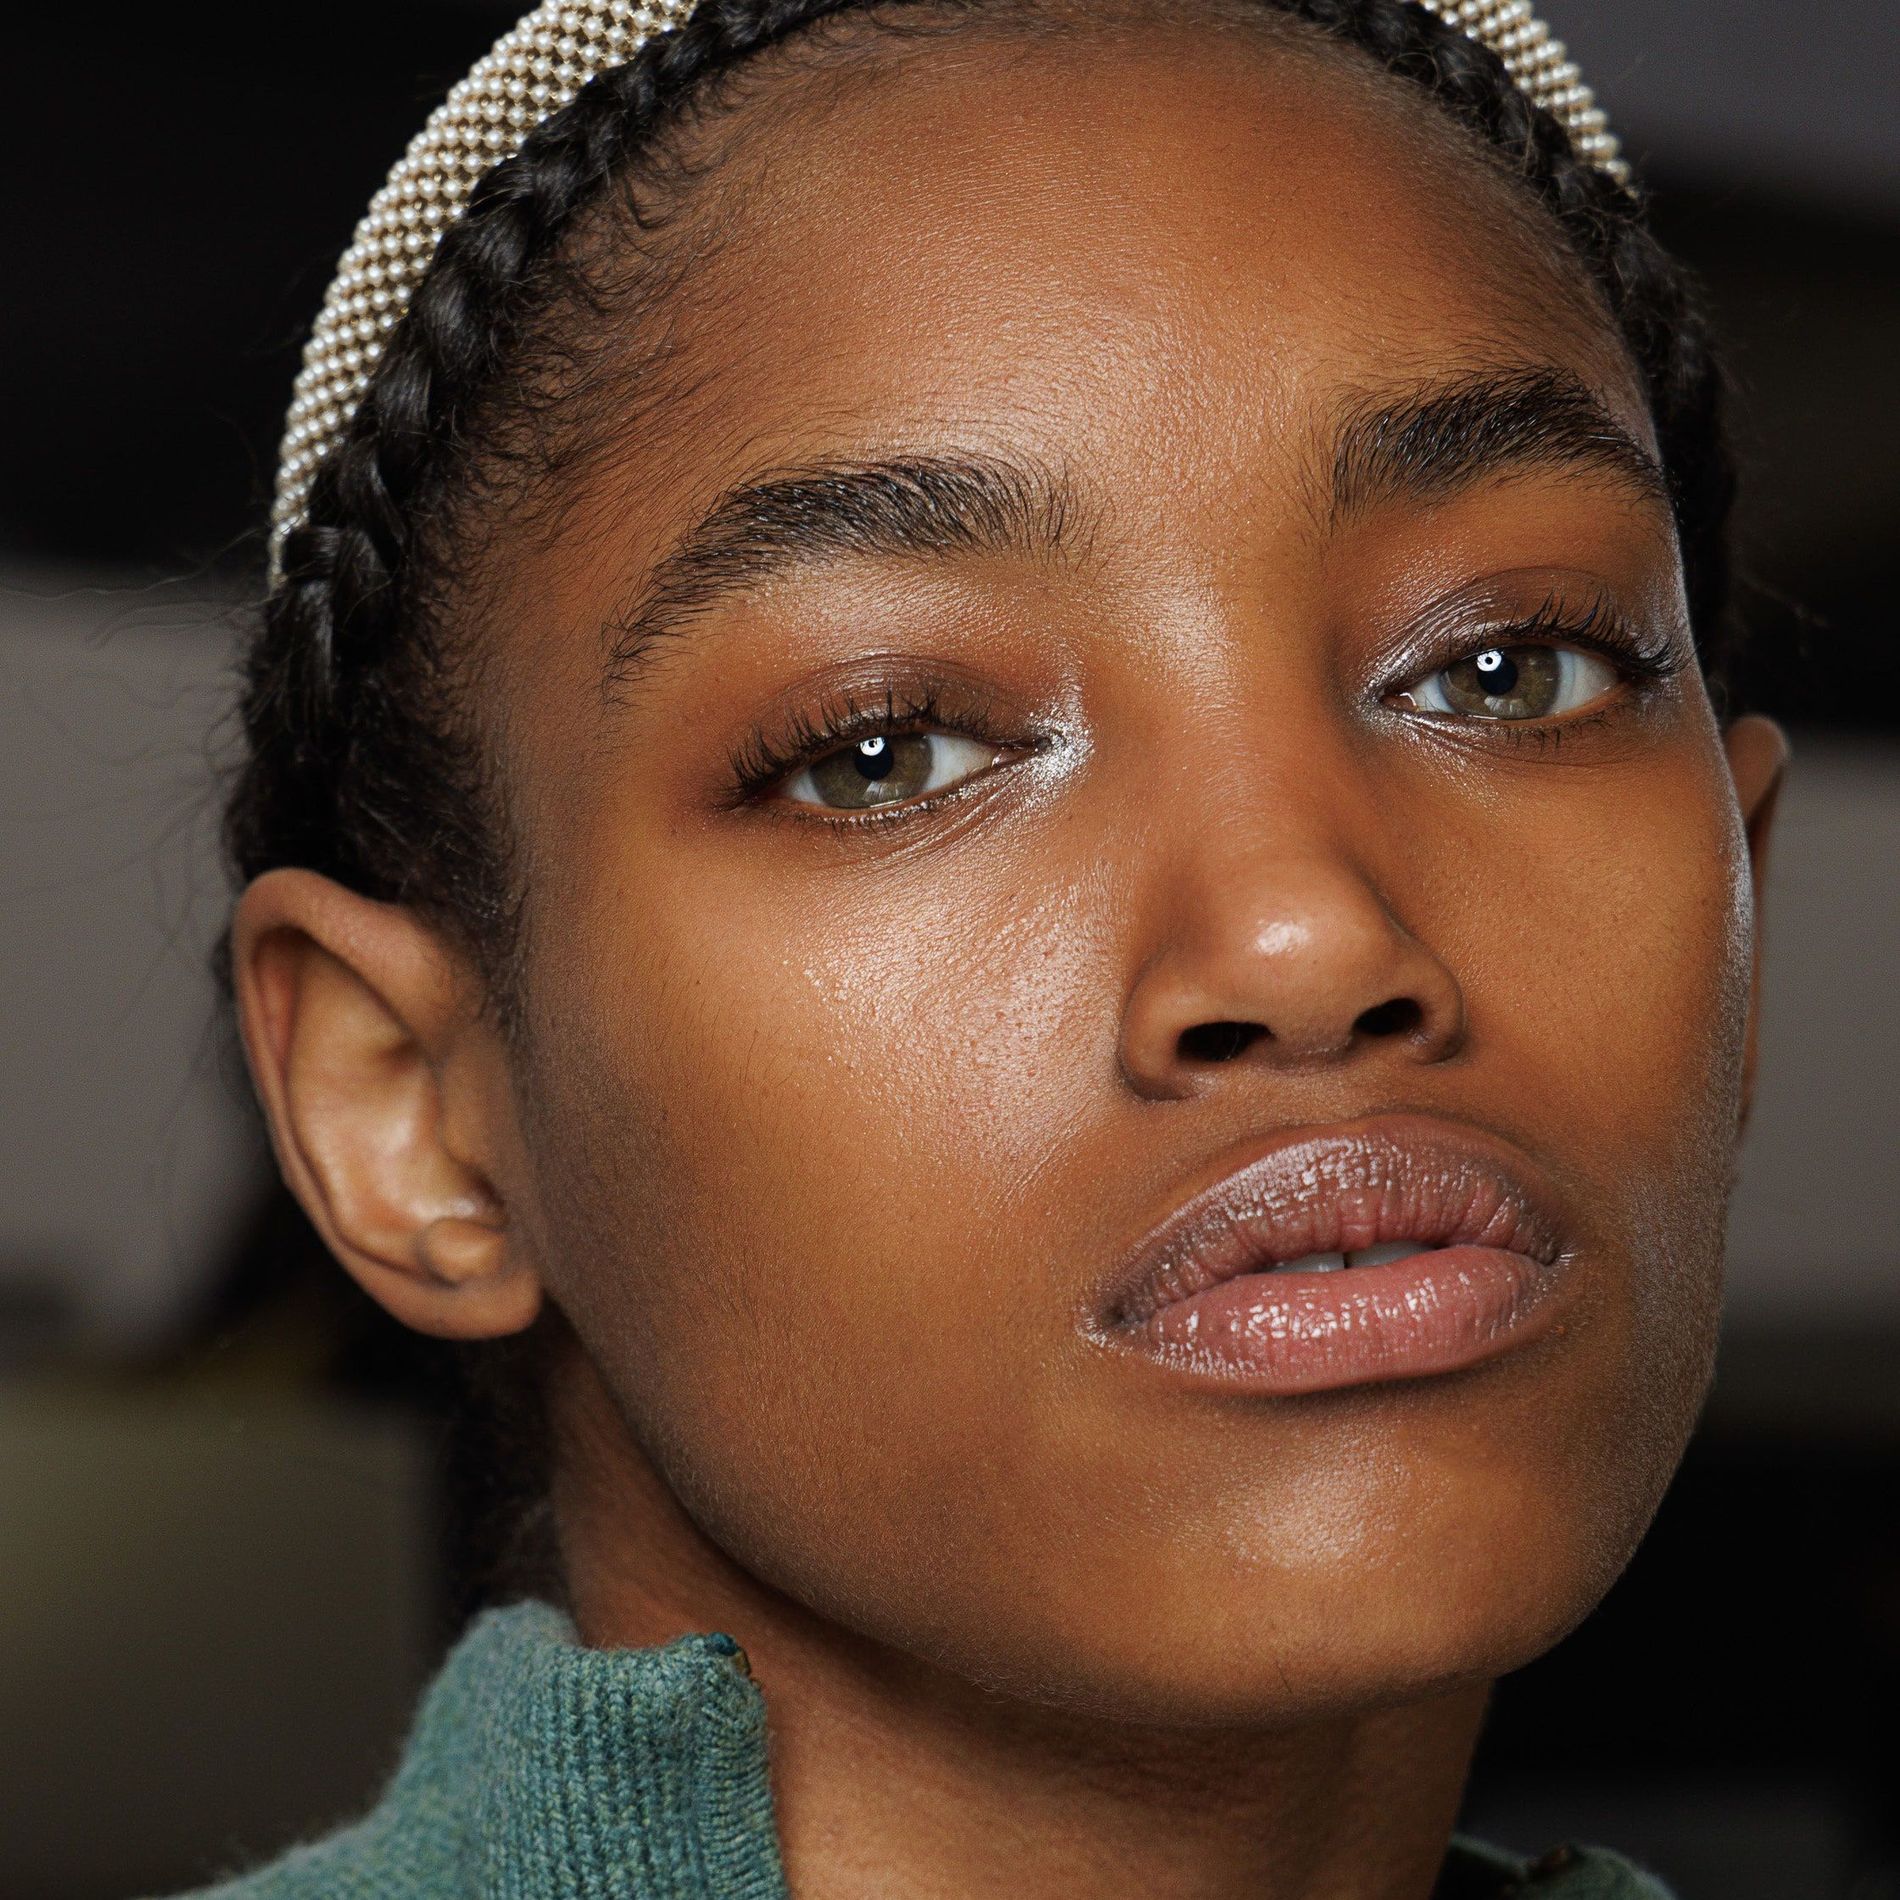 Bare faced beauty: This is how to look great without makeup - Vogue  Scandinavia